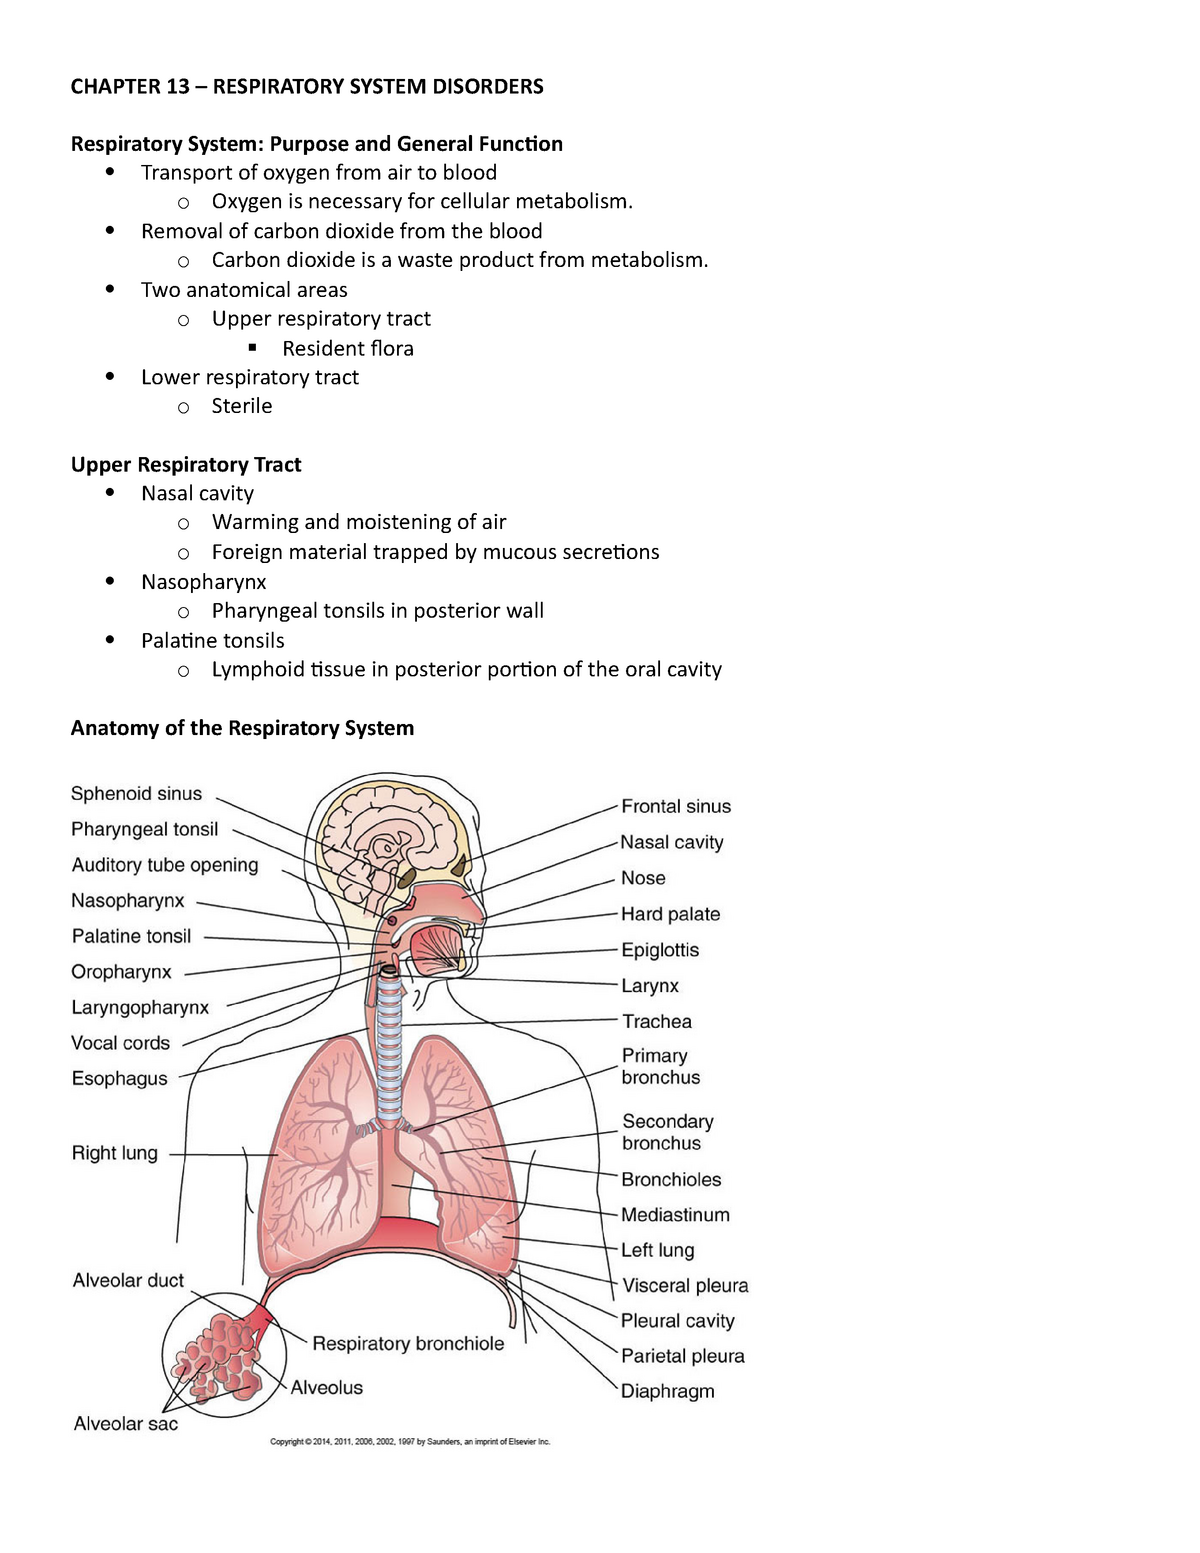 Respiratory System Disorders - NR-22 - Pathophysiology With Respiratory System Worksheet Answer Key